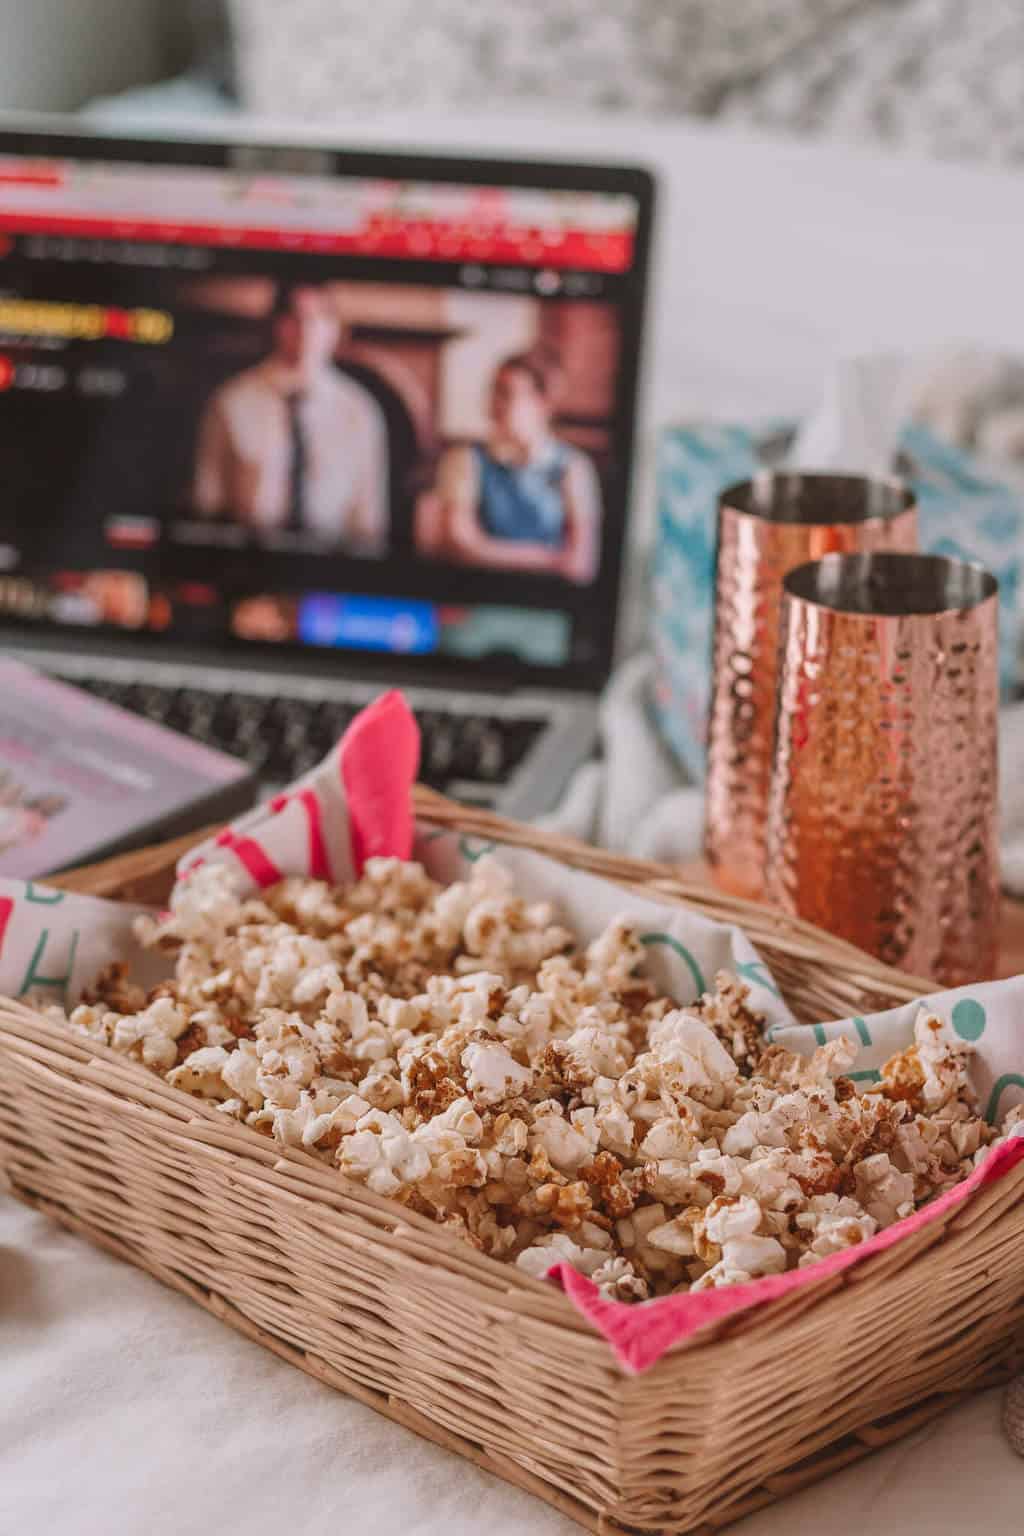 Movie night can be fun, exciting, thrilling, or any other combination of emotions. So what steps can you take to spice up the average winter movie night?